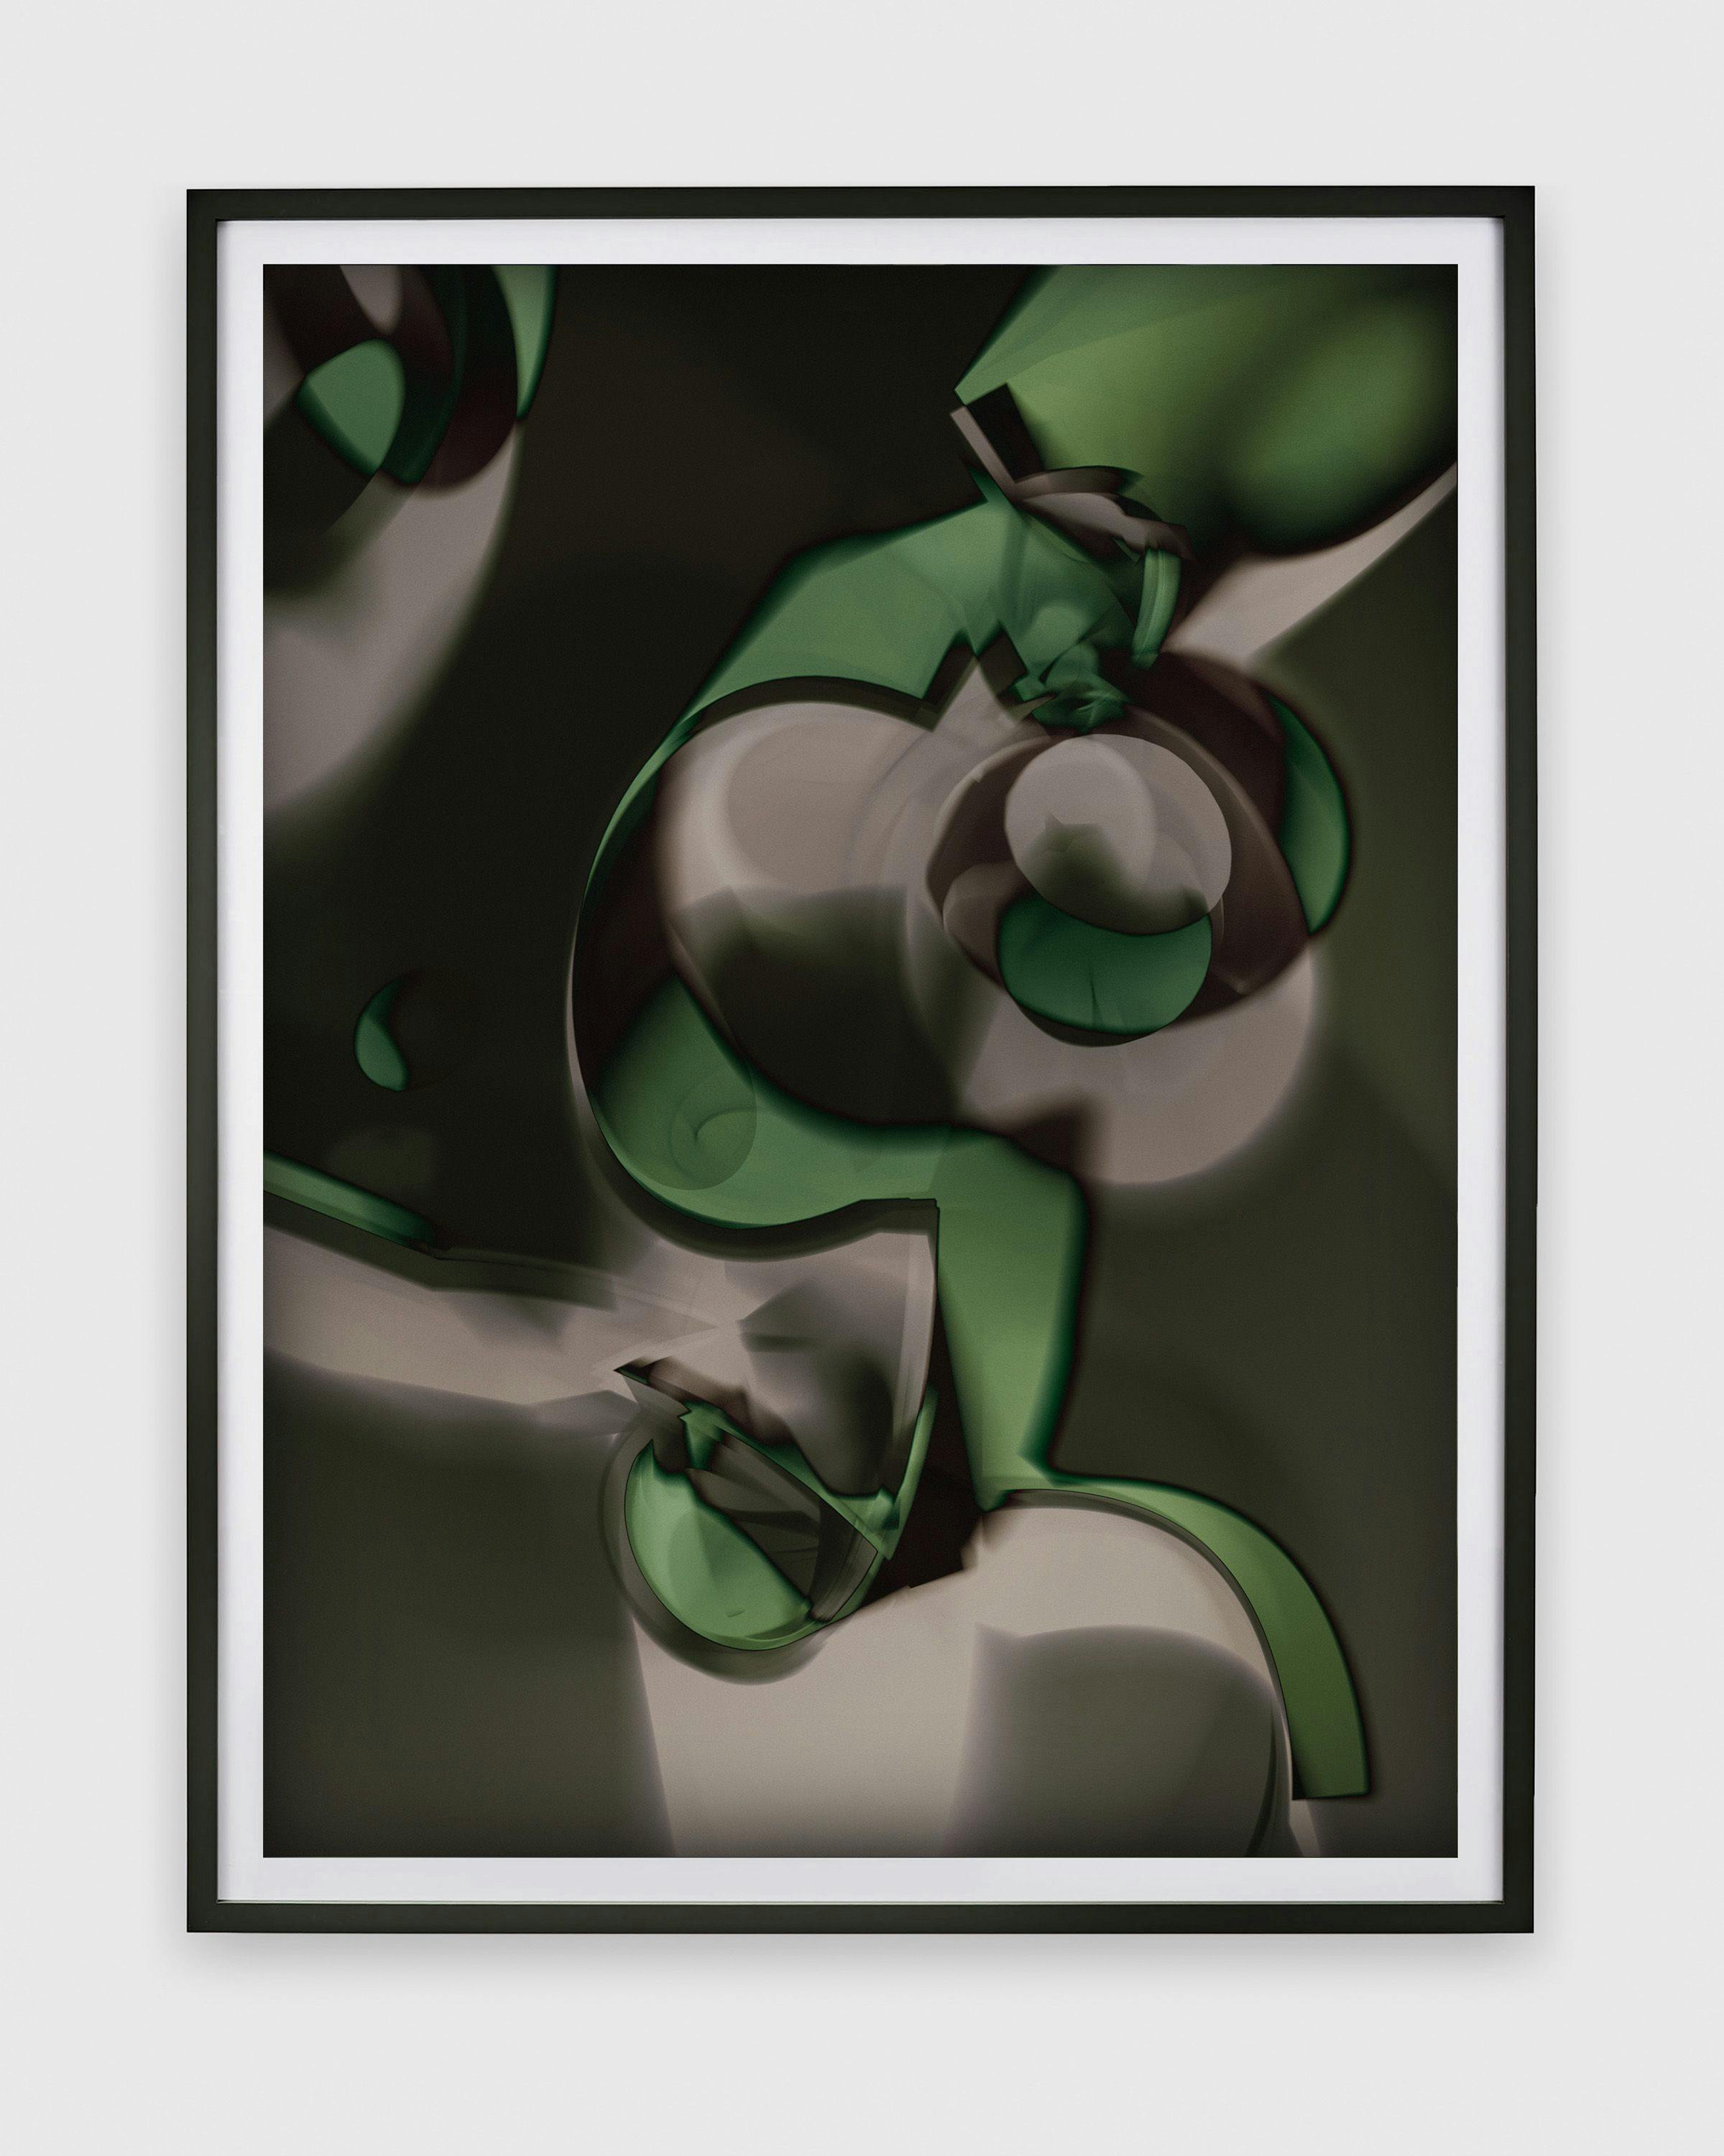 A photograph by Thomas Ruff, titled phg.s.01, dated 2012.